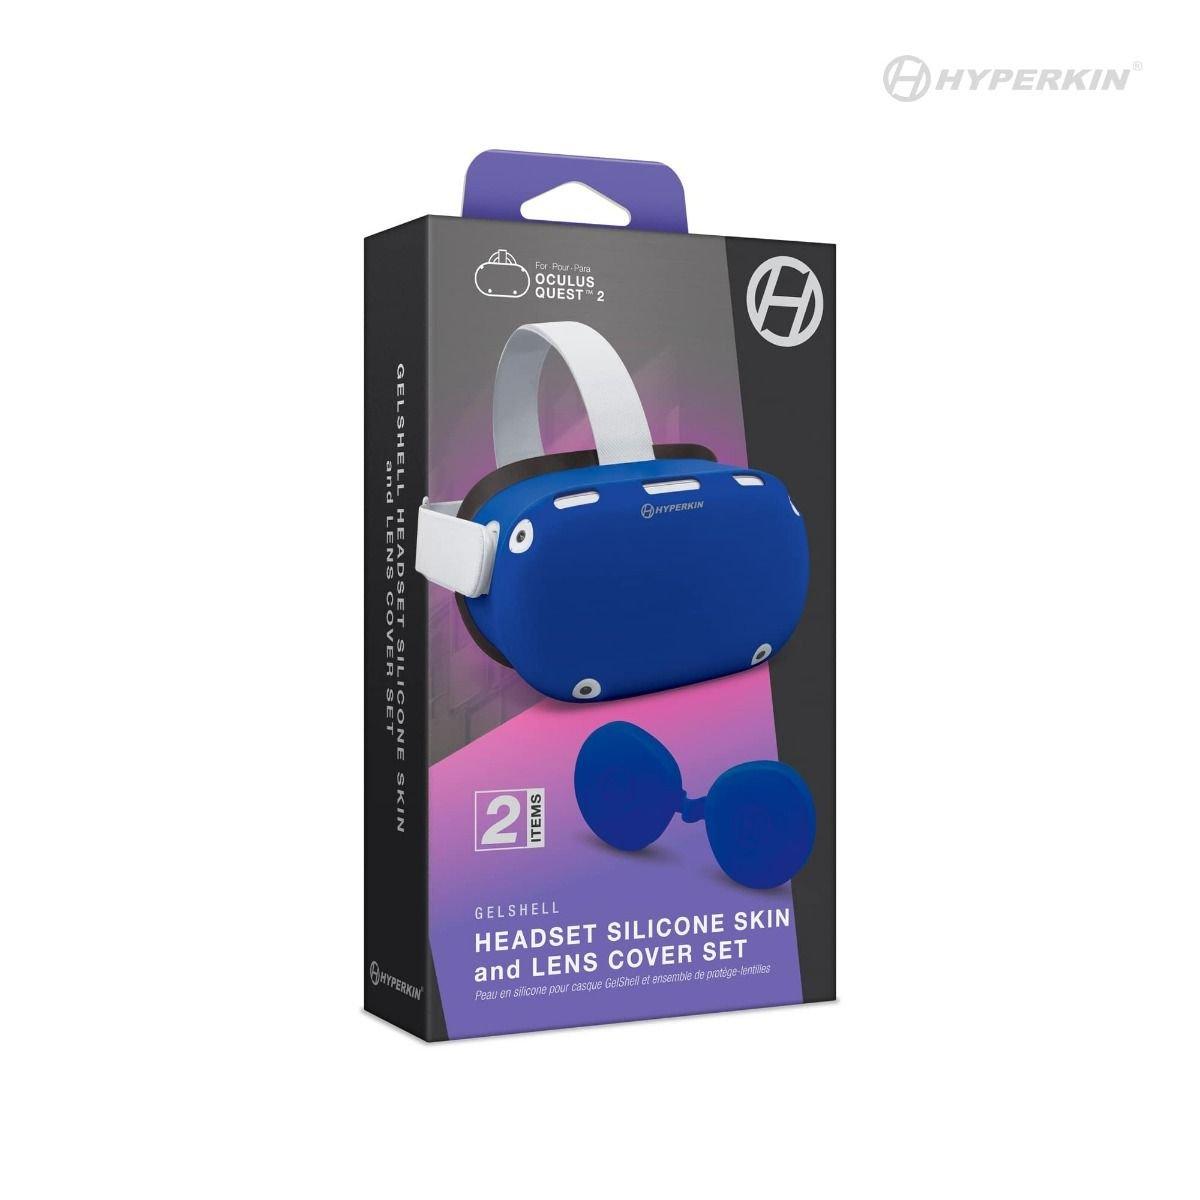 list item 4 of 5 Hyperkin GelShell Headset Silicone Skin and Lens Cover Set for Meta Quest 2